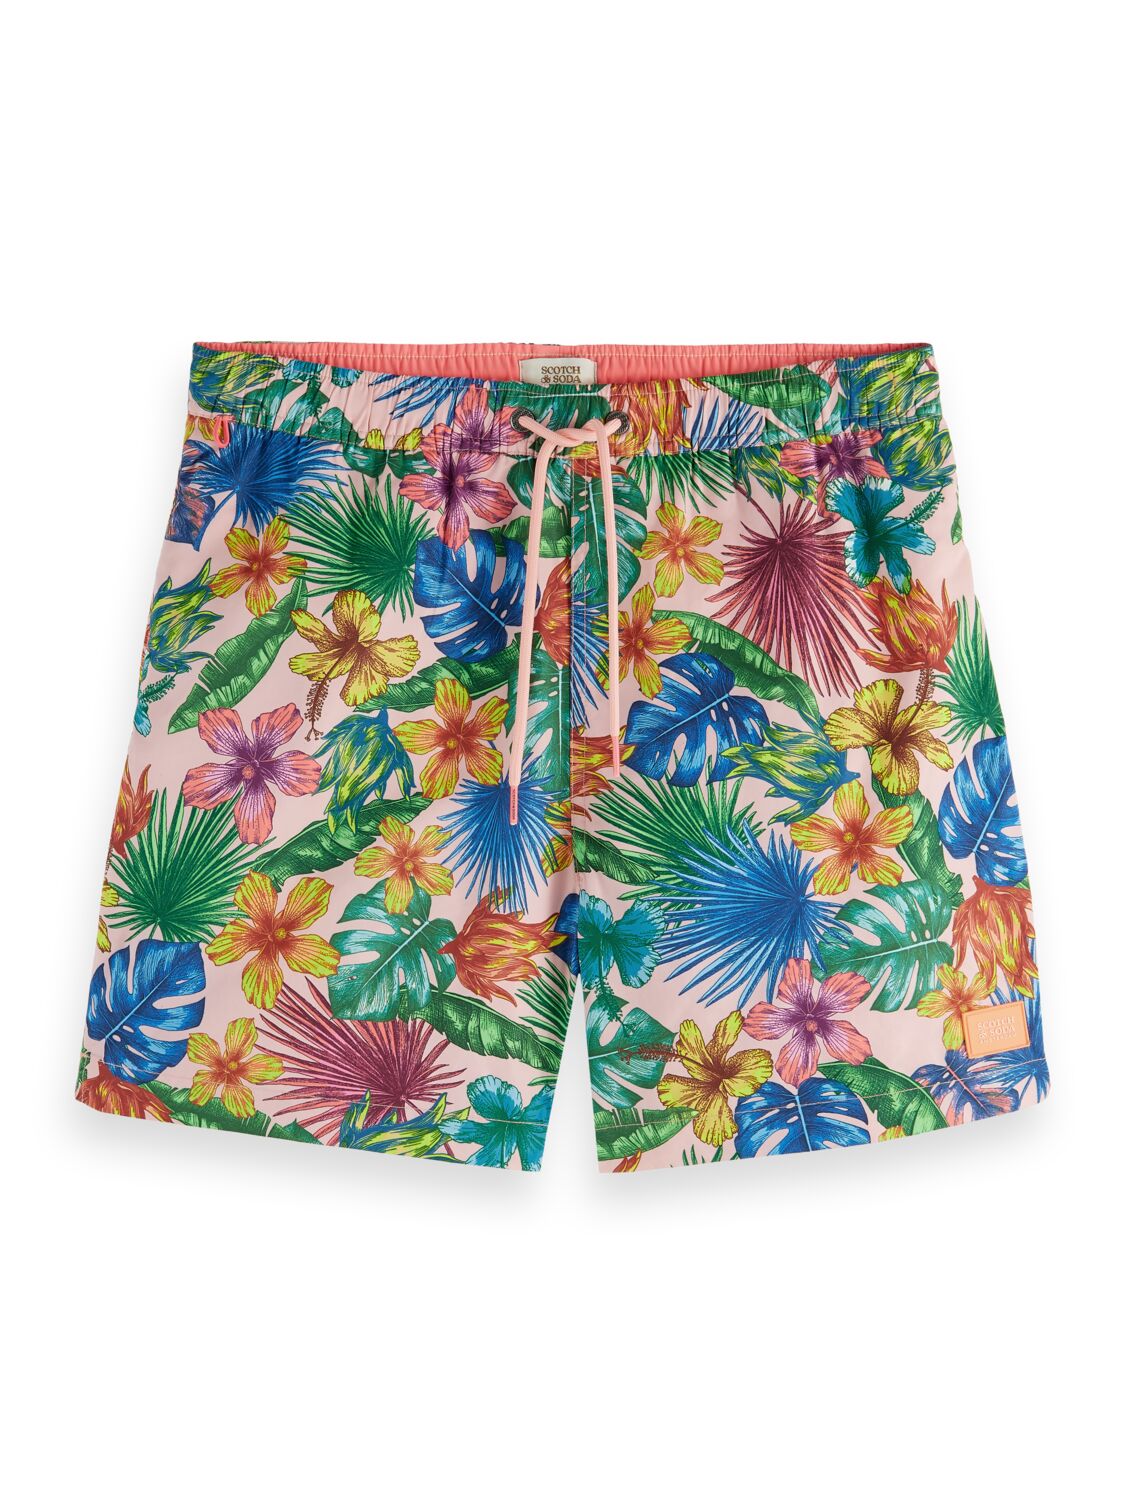 Scotch and Soda Recycled Nylon Swim Shorts - Pink Floral